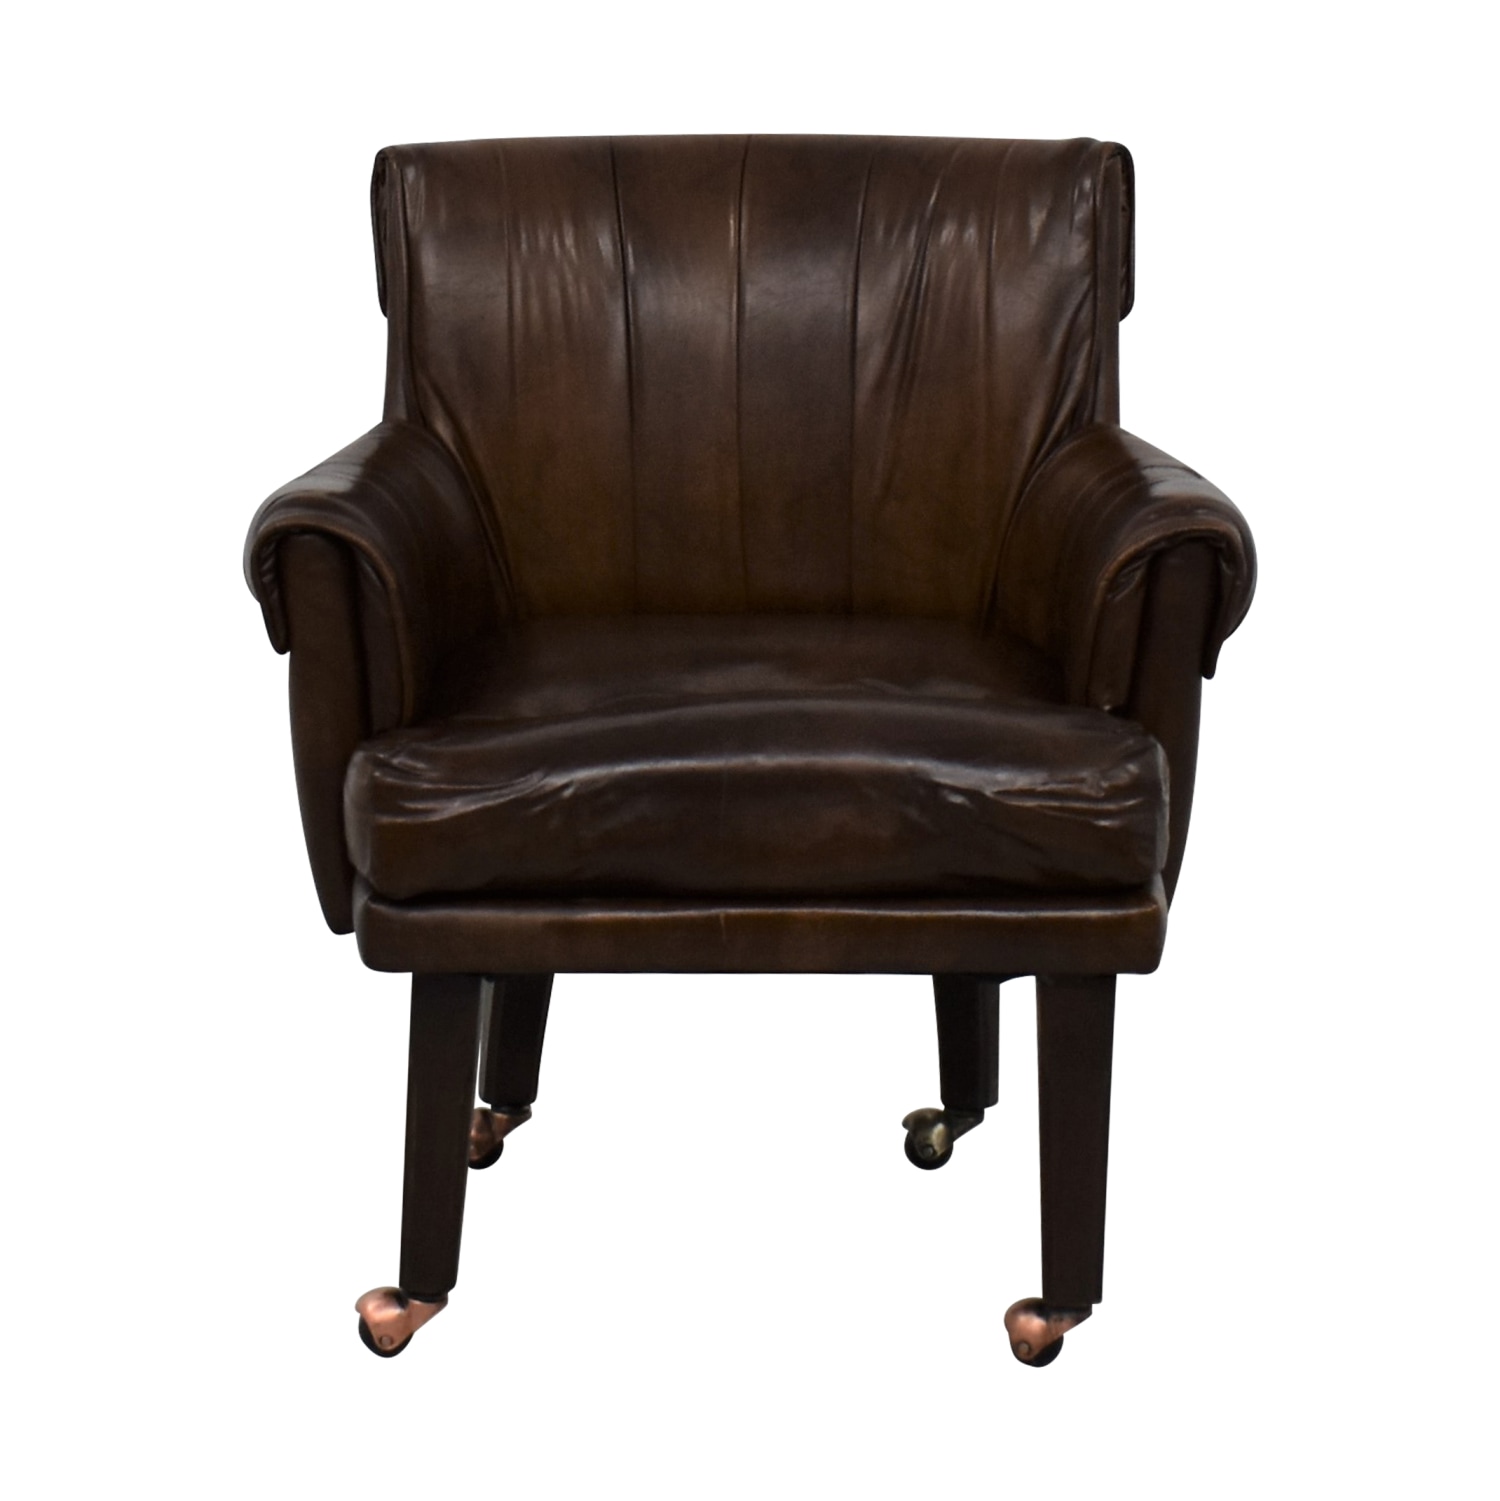 Louis Philippe-Style Floral Parlor Chair, 93% Off